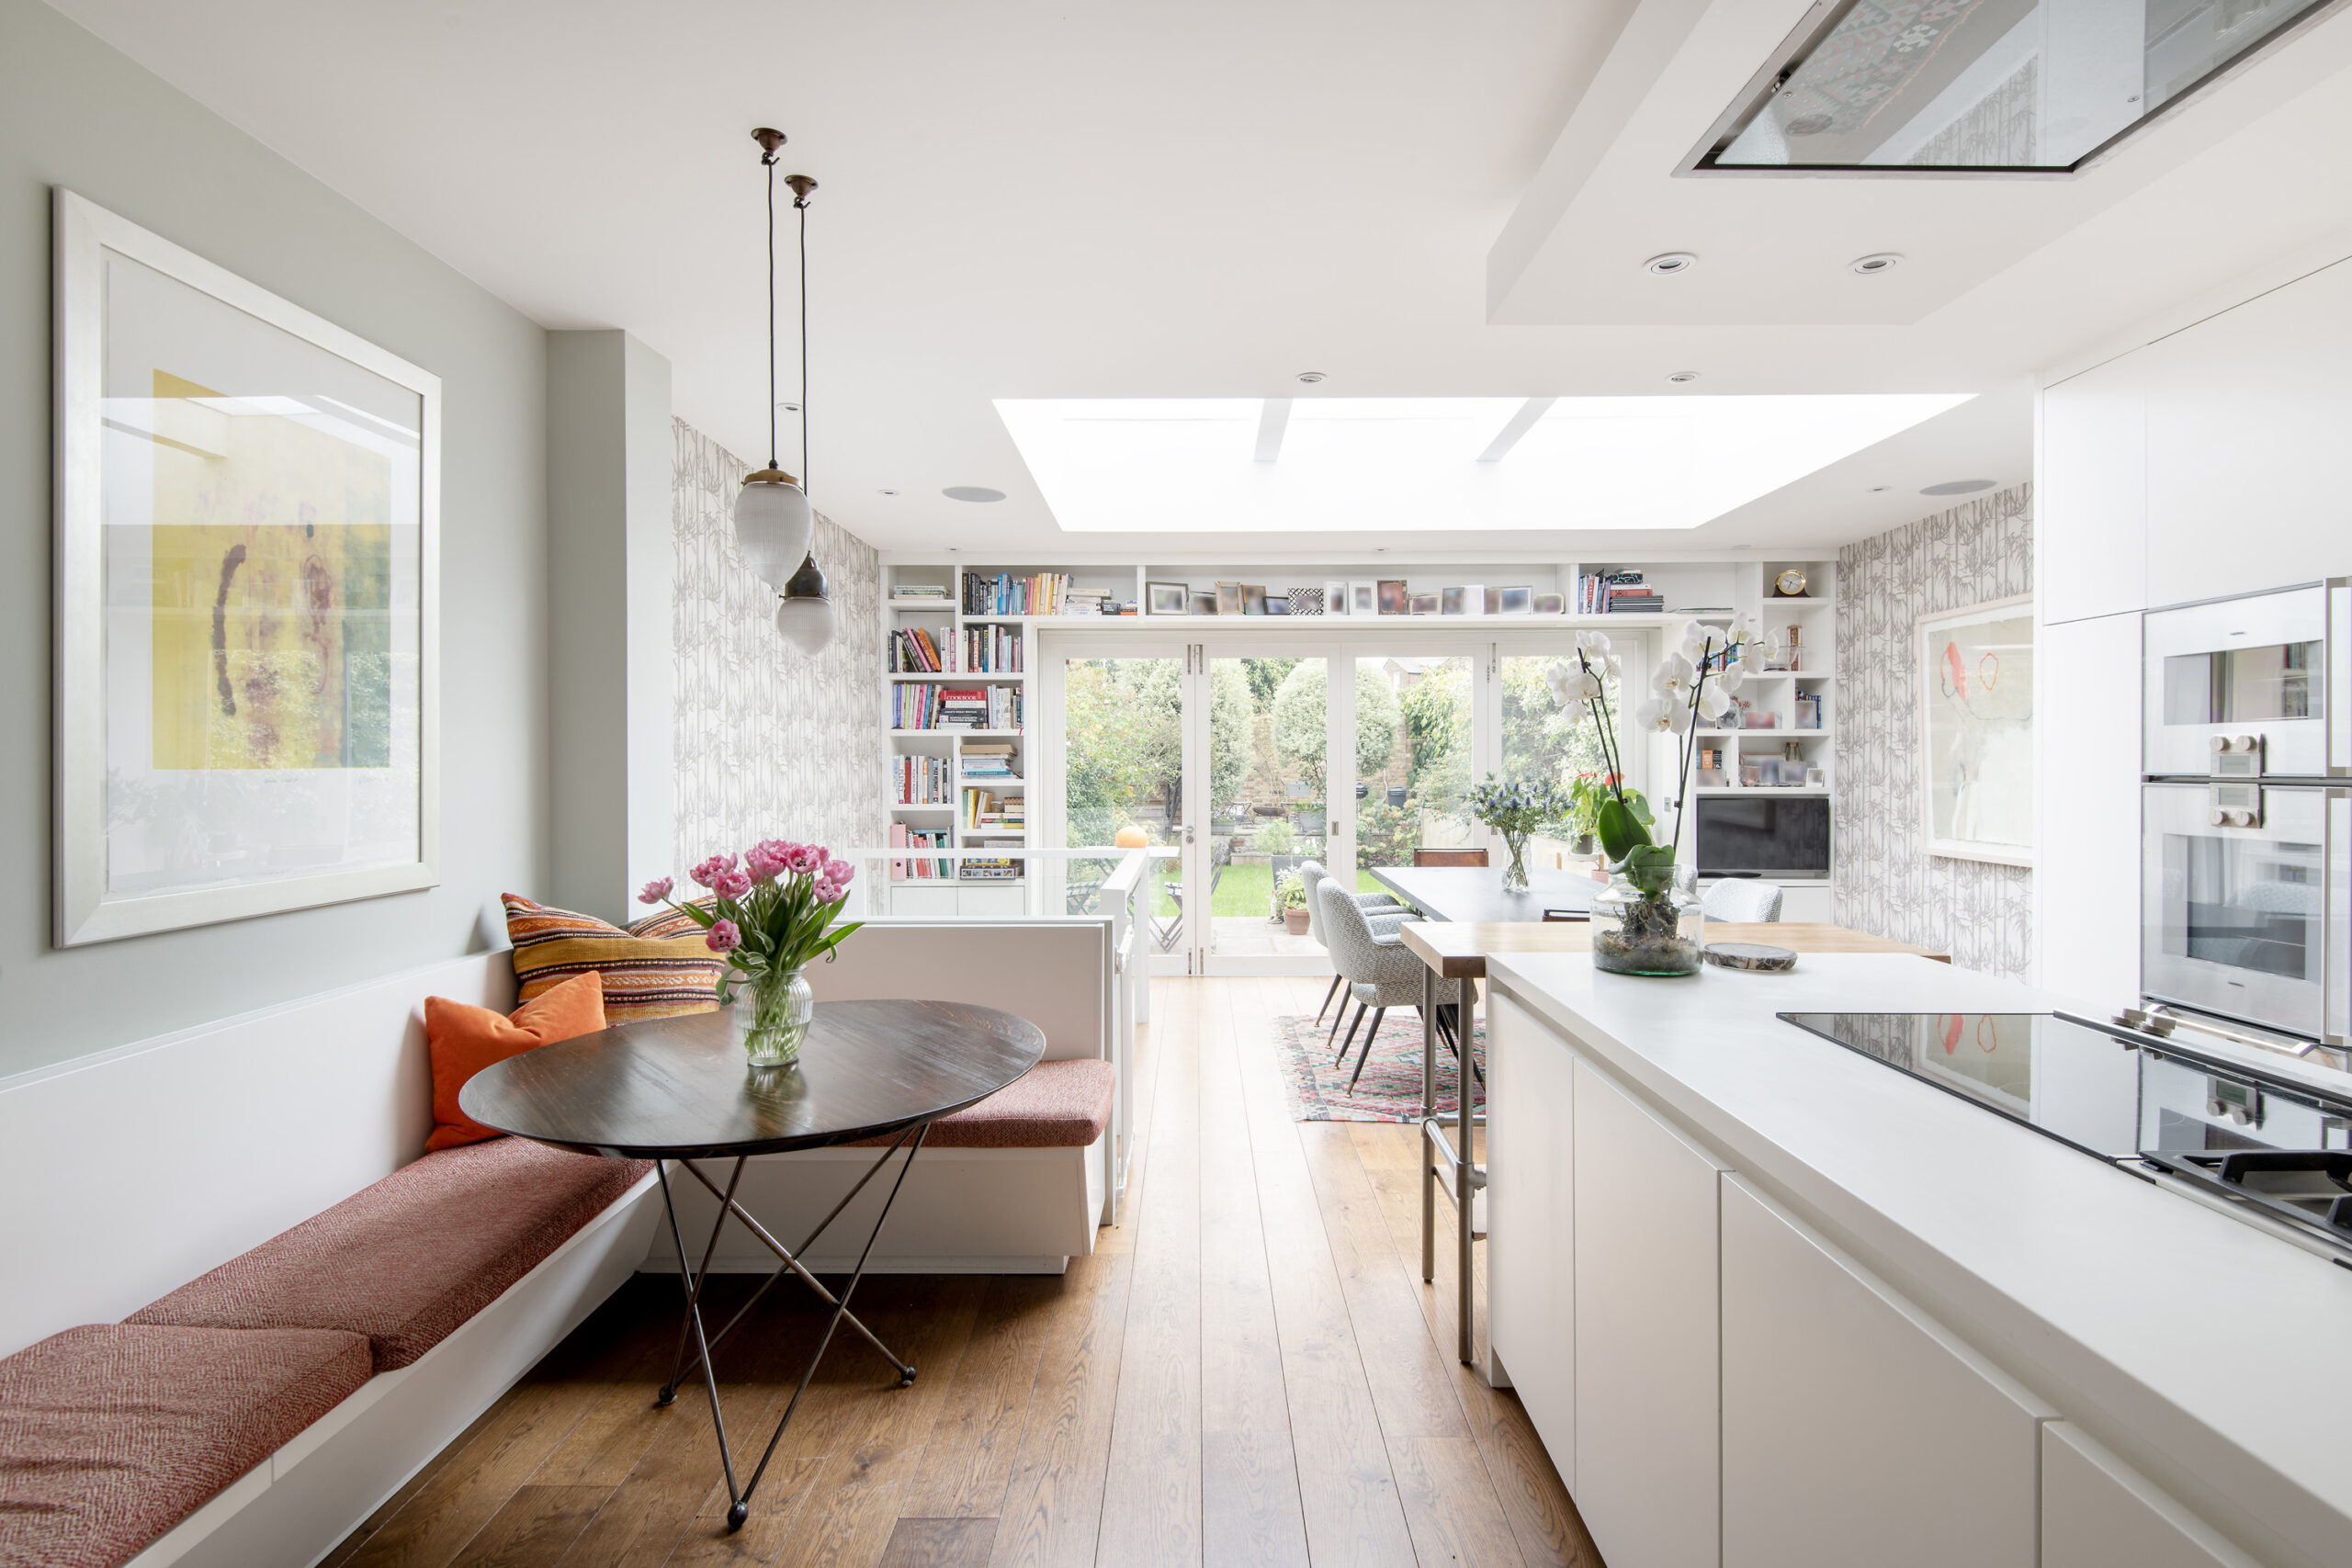 Luxury open-plan kitchen and dining room of a four-bedroom home for sale in Hammersmith